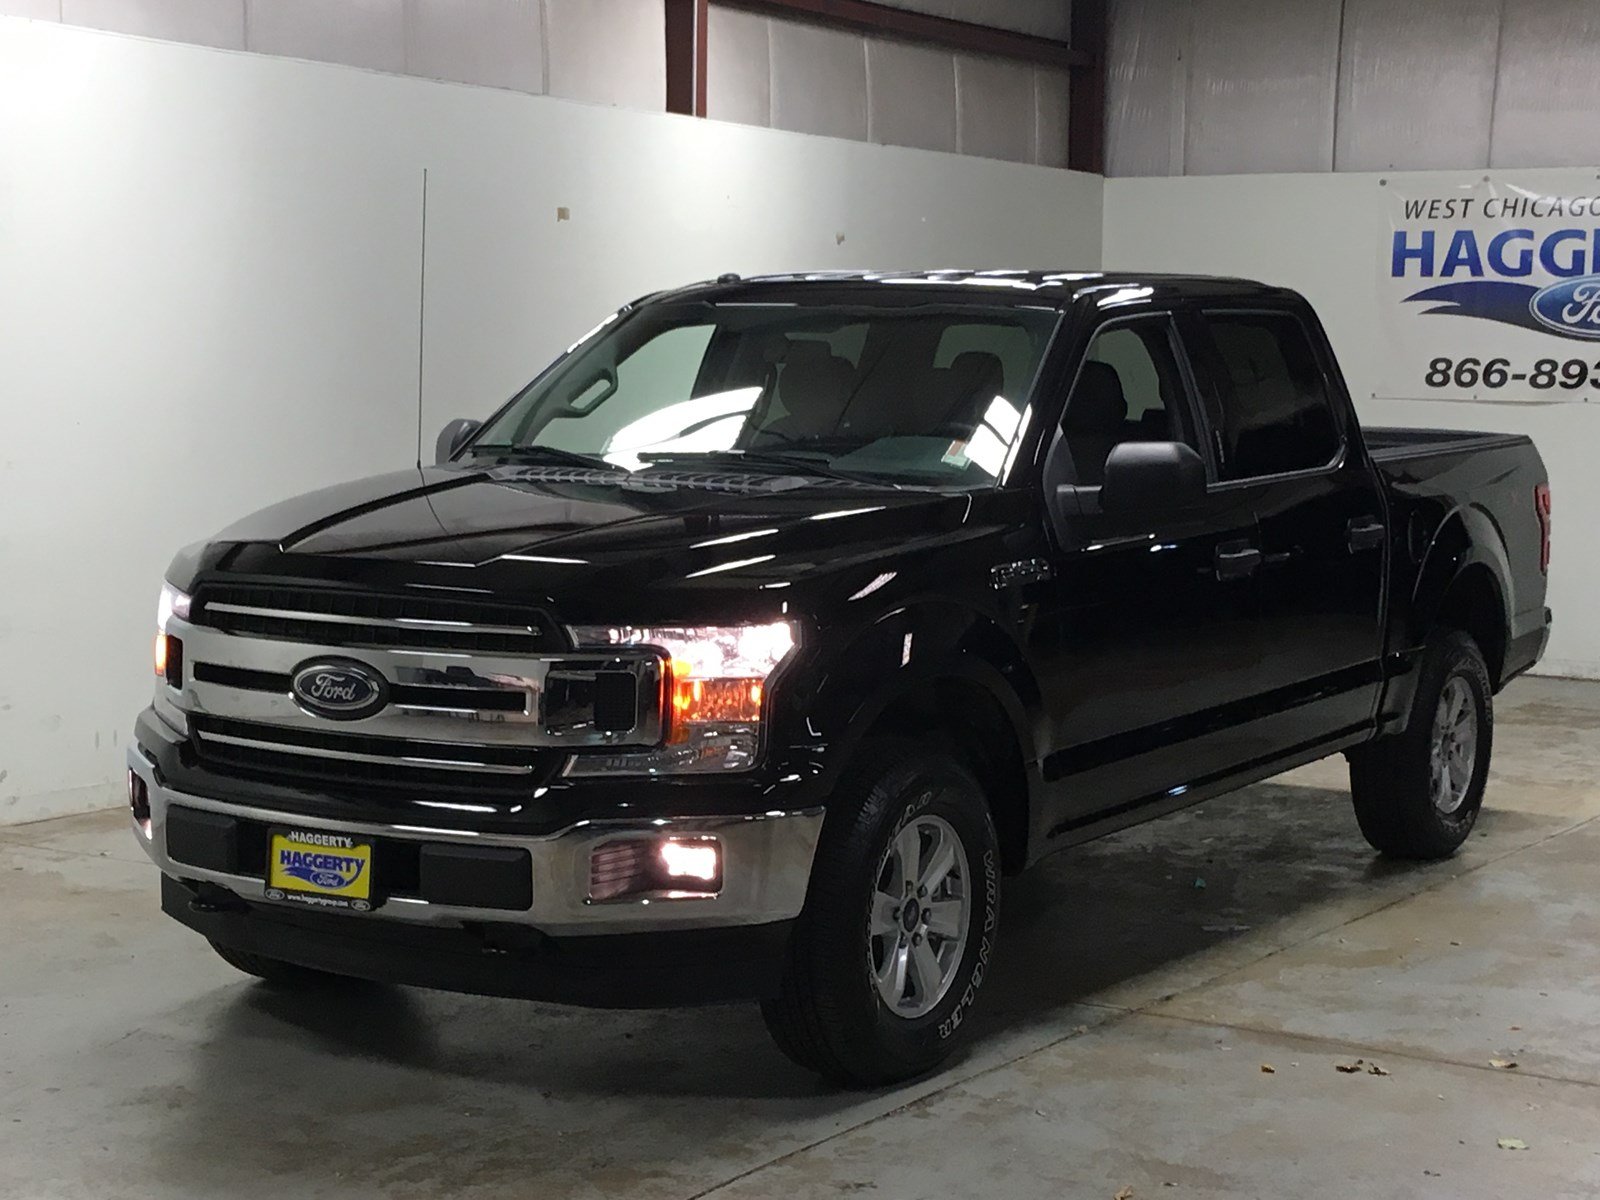 Certified PreOwned 2018 Ford F150 XLT 4WD Ecoboost Crew Cab Pickup in West Chicago 3498 